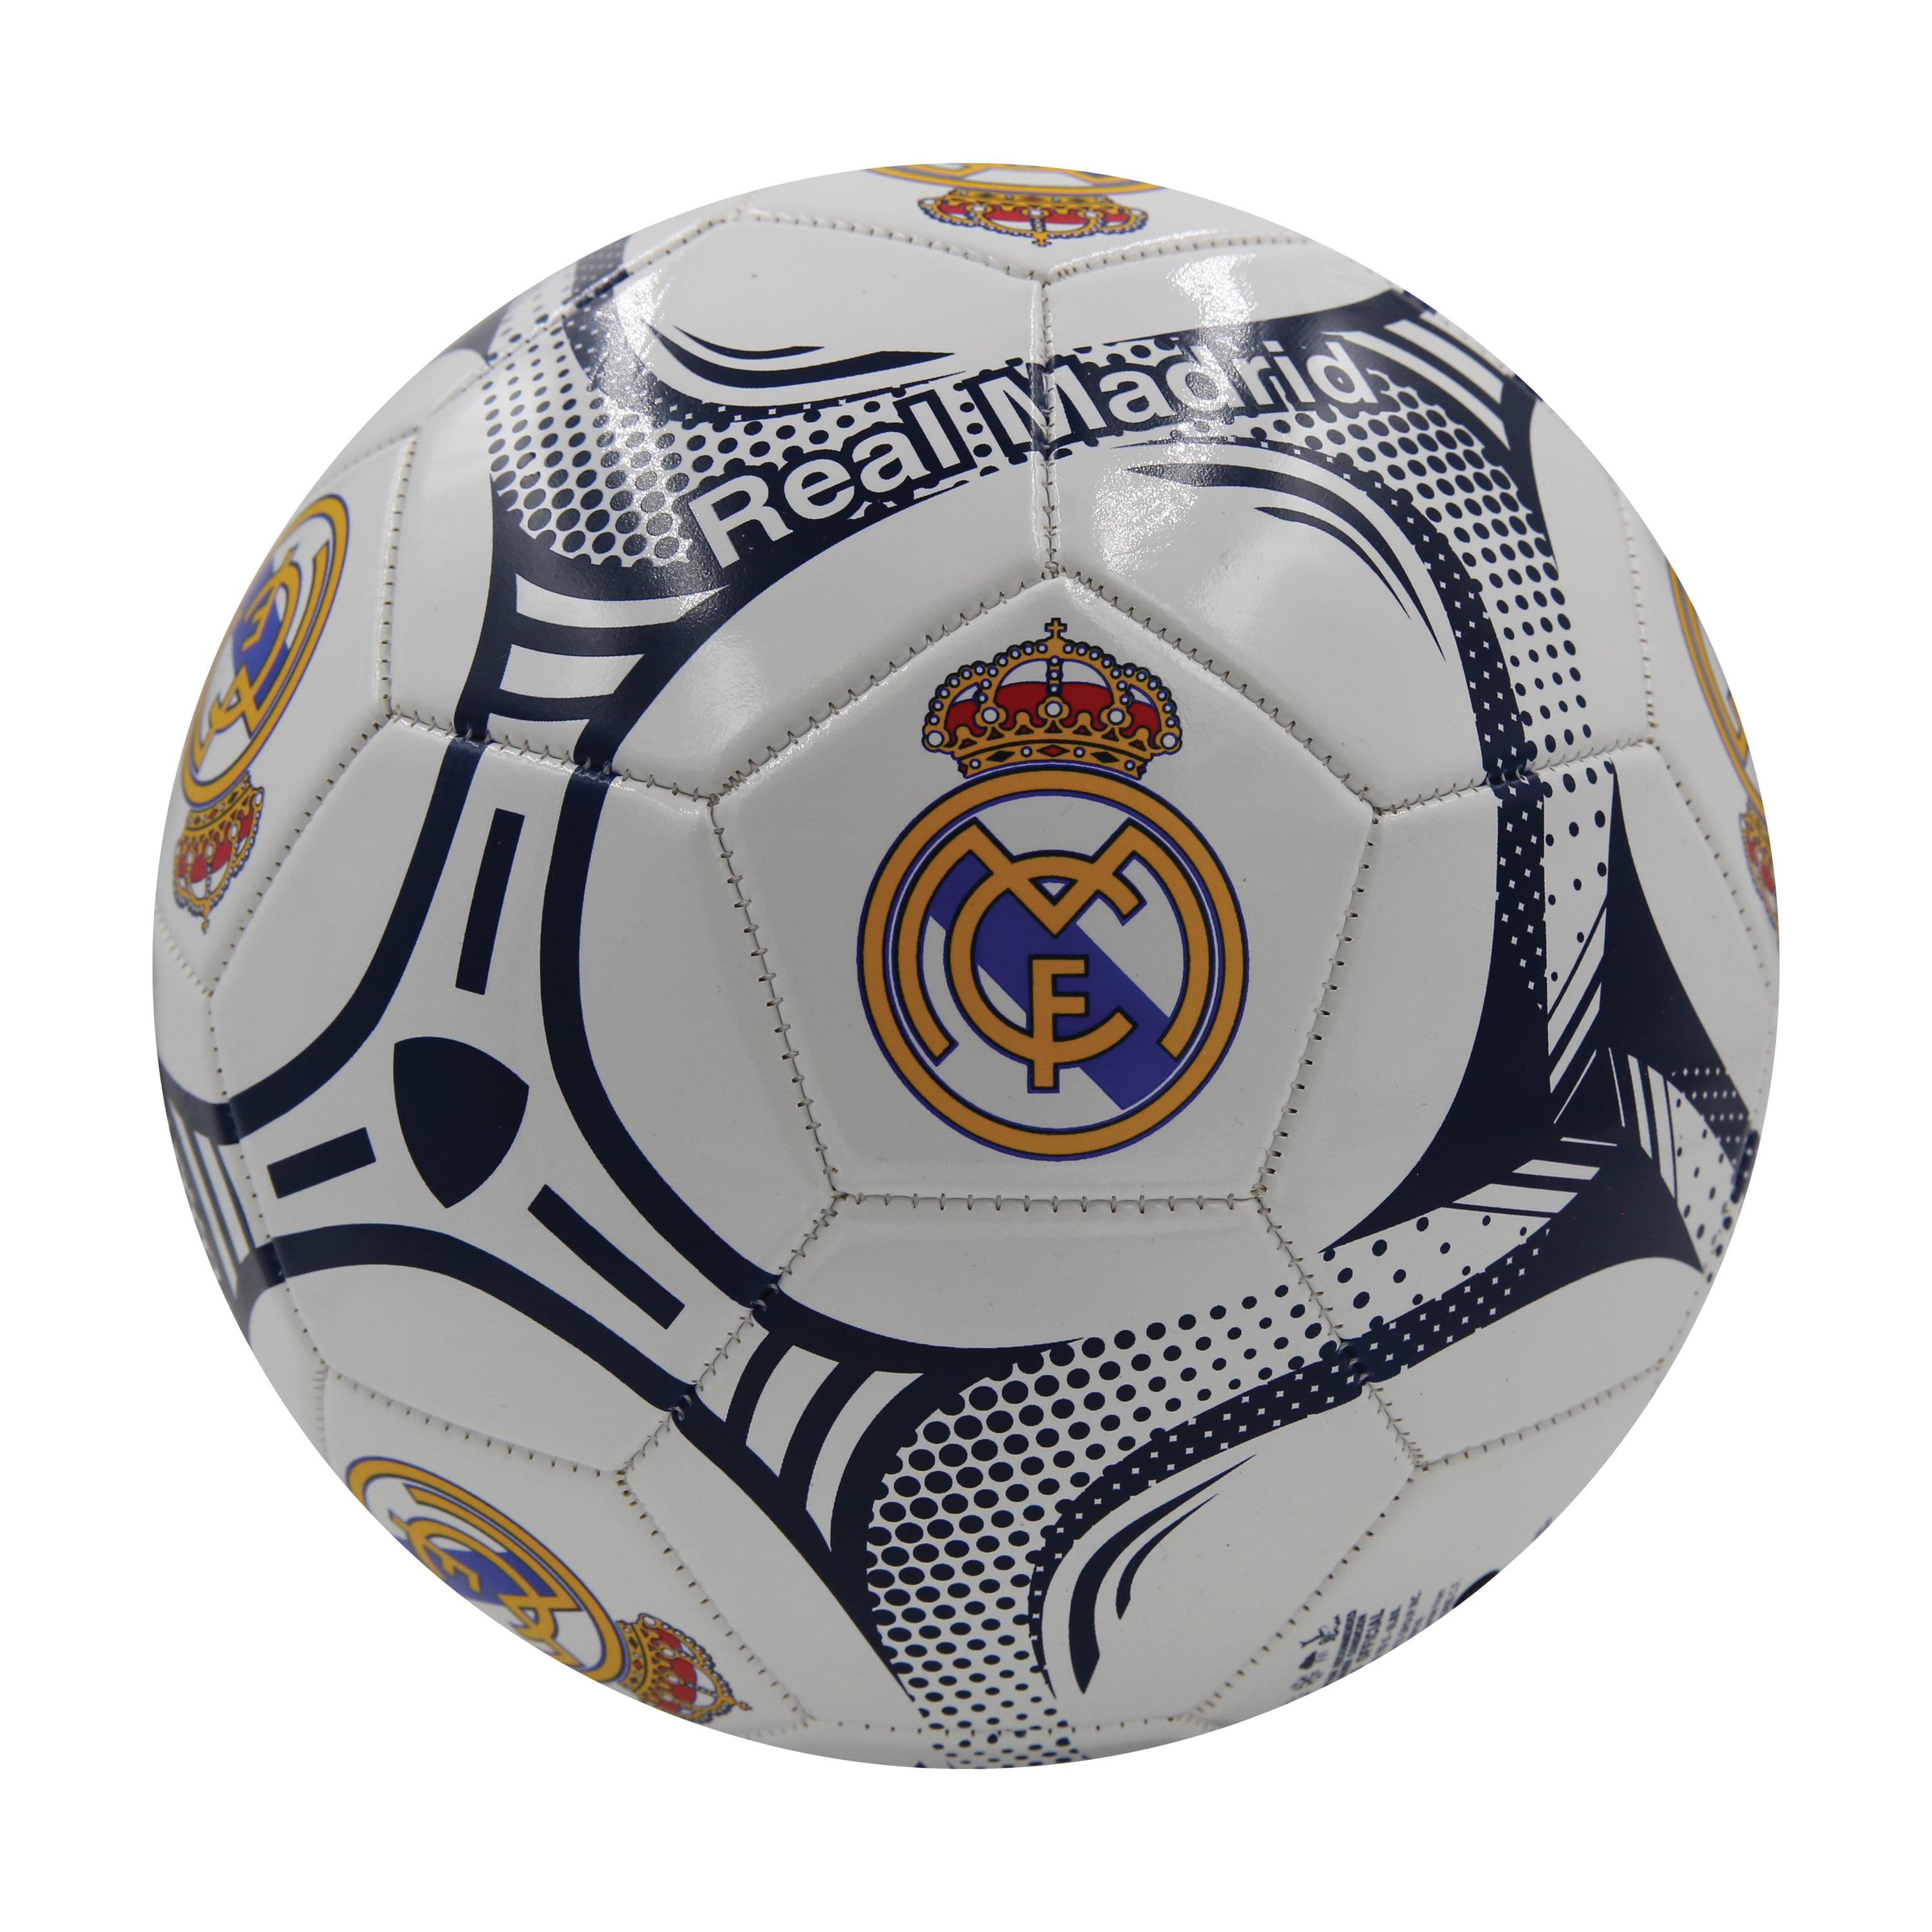 Spedster Real Madrid Football Top Quality Genuine Match ball Size 5 